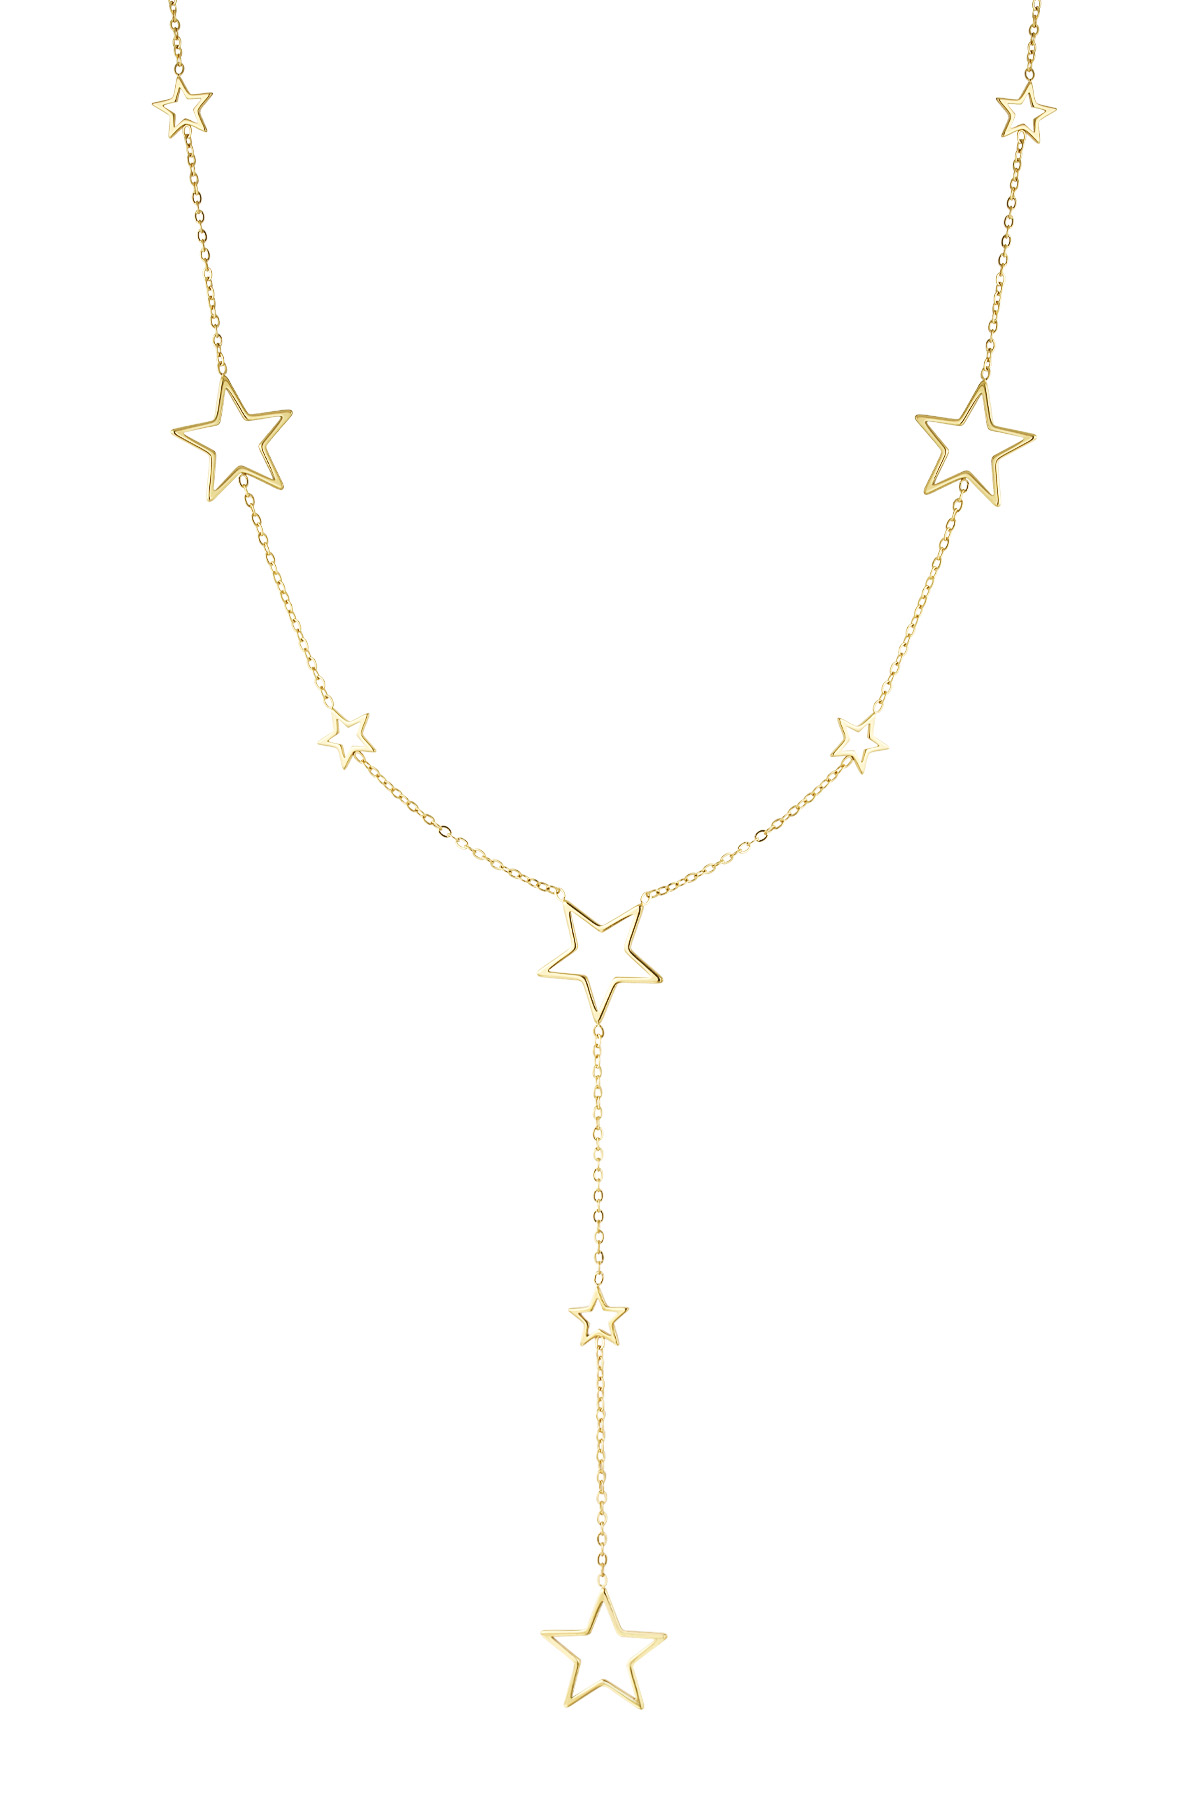 long necklace with different star charms - gold  h5 